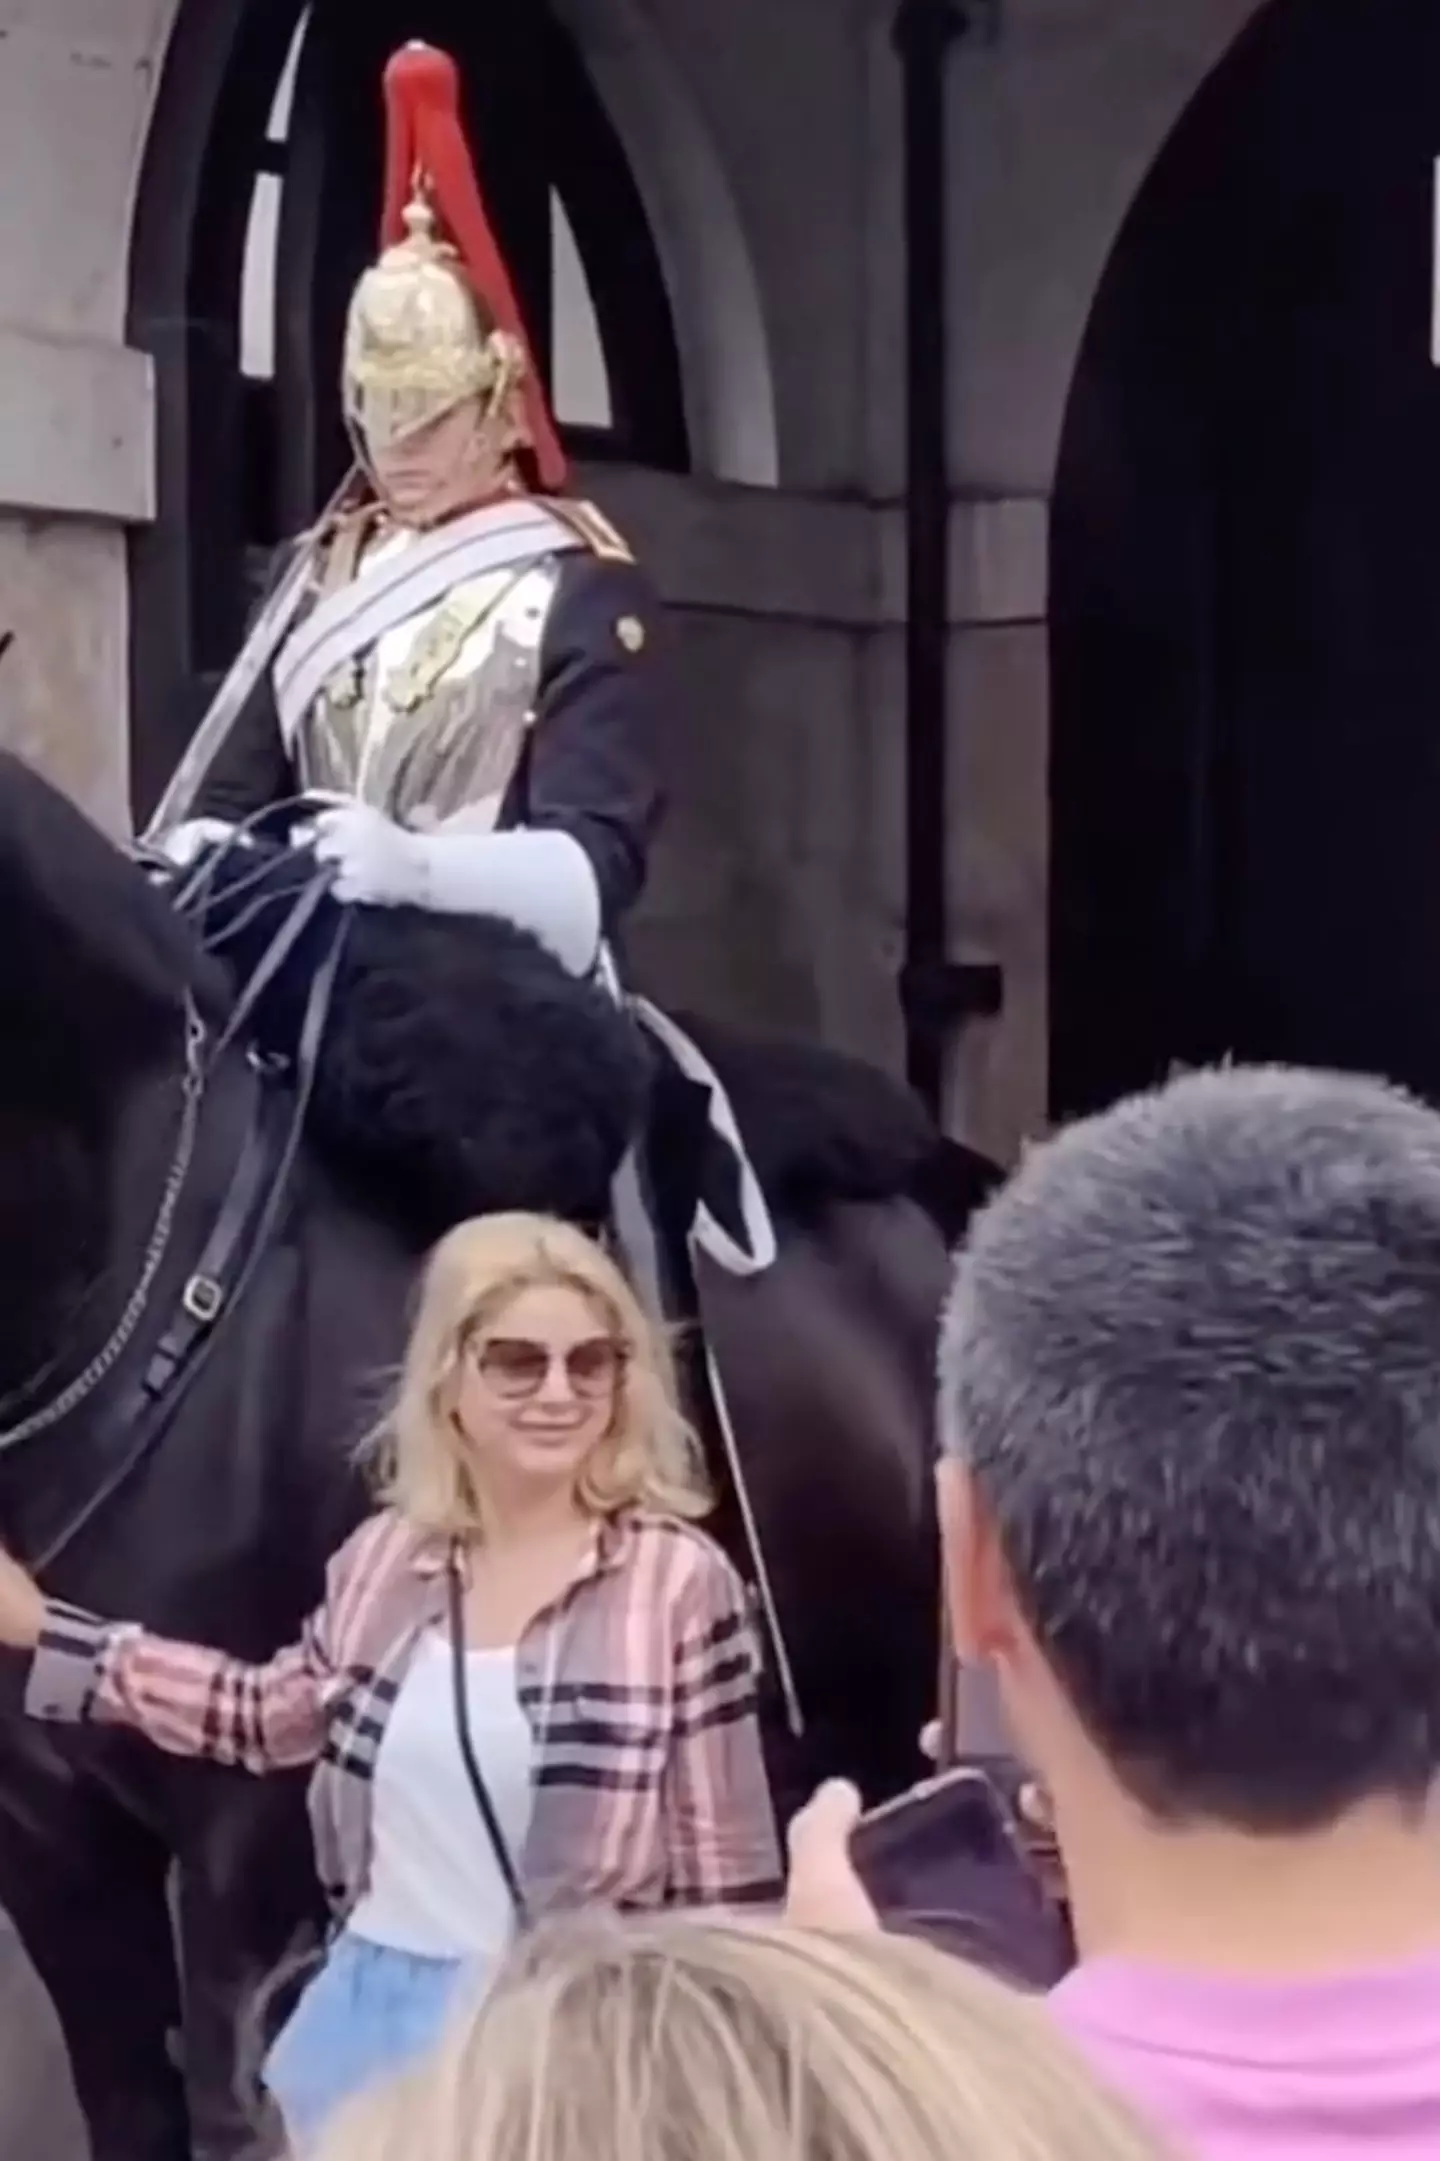 The woman tried to get a sneaky pic with the horse.